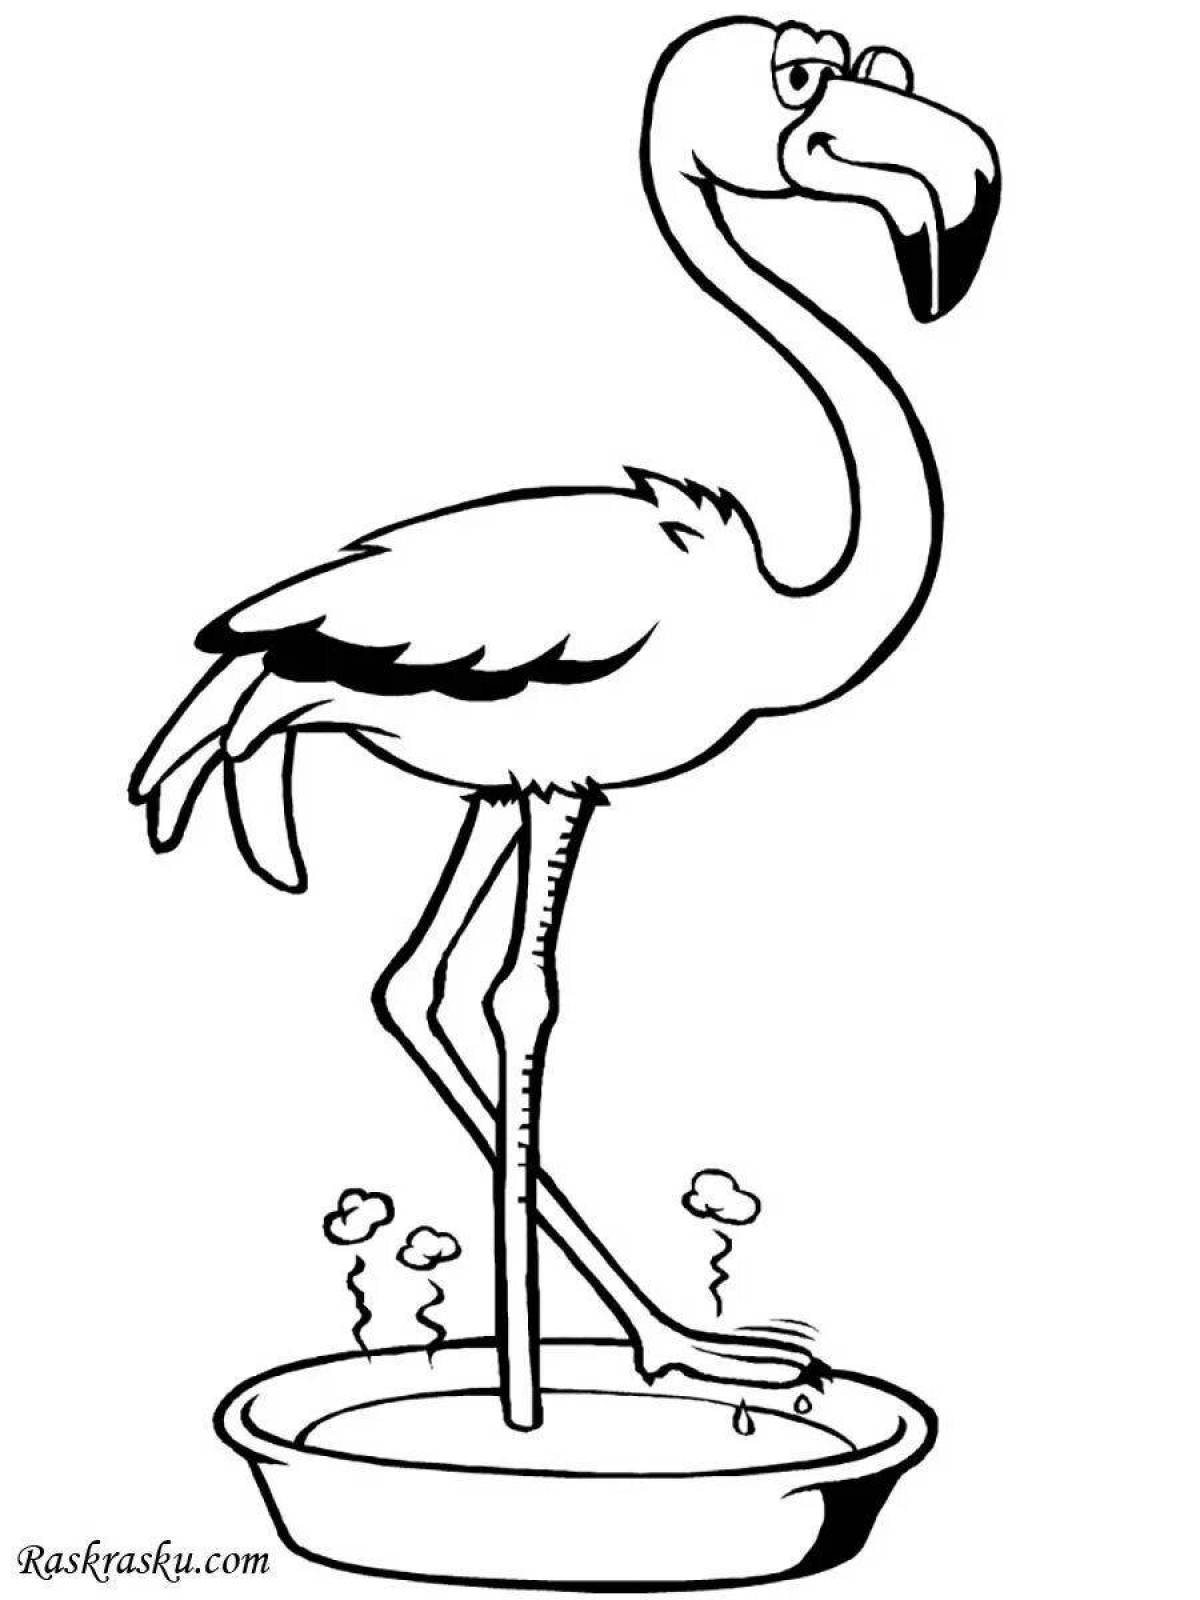 Exotic pink flamingo coloring page